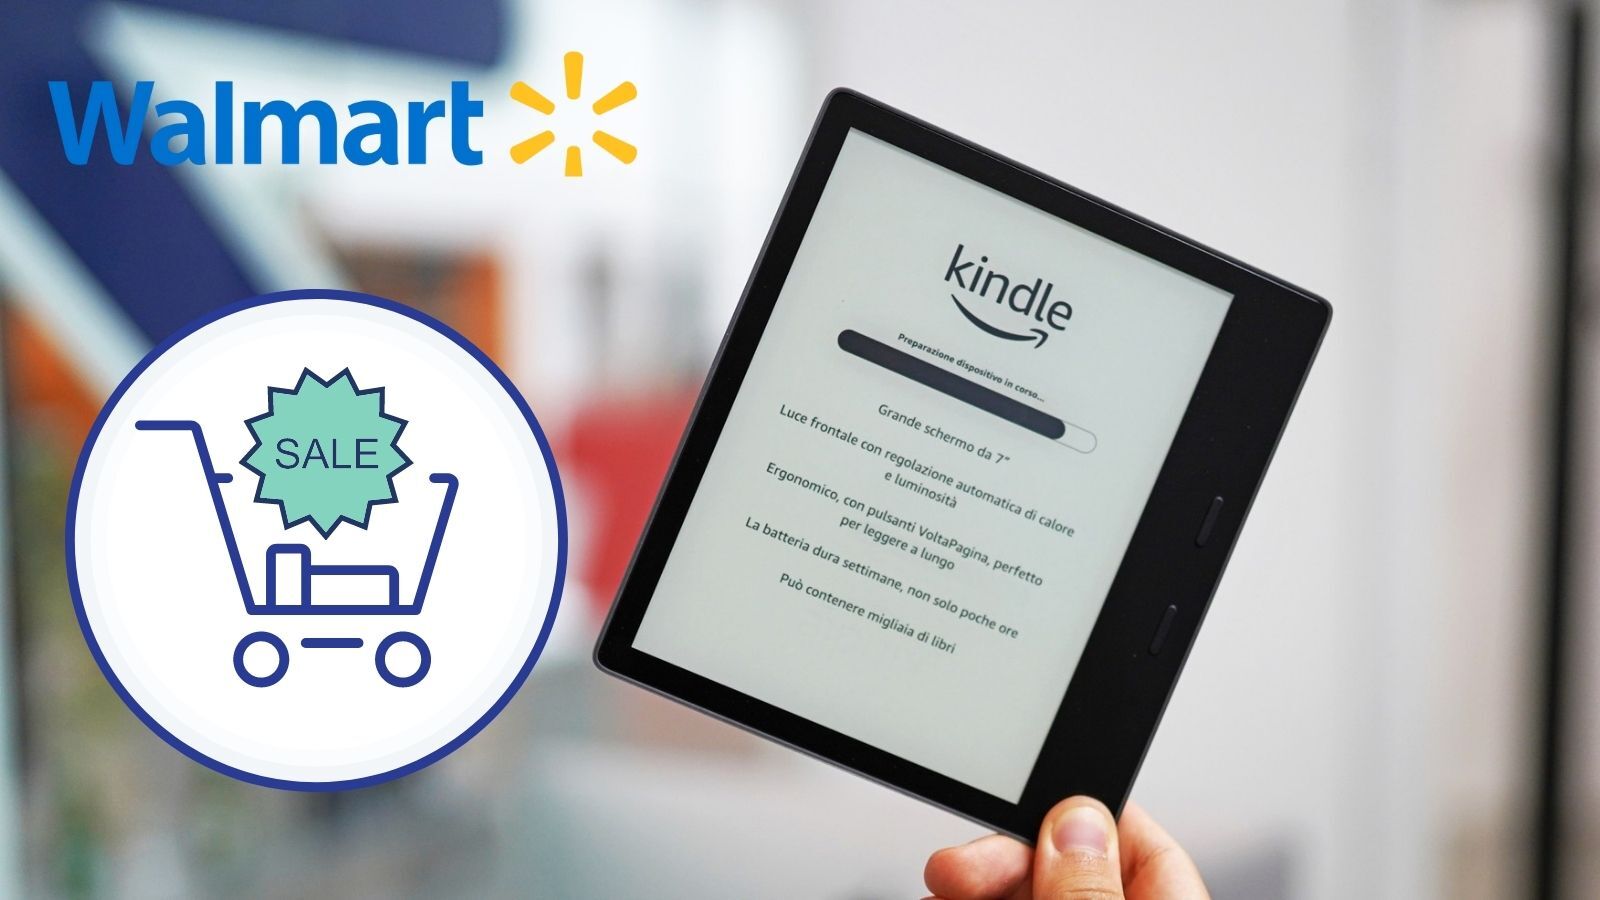 Does Walmart Sell Kindle Readers? (All You Need to Know)